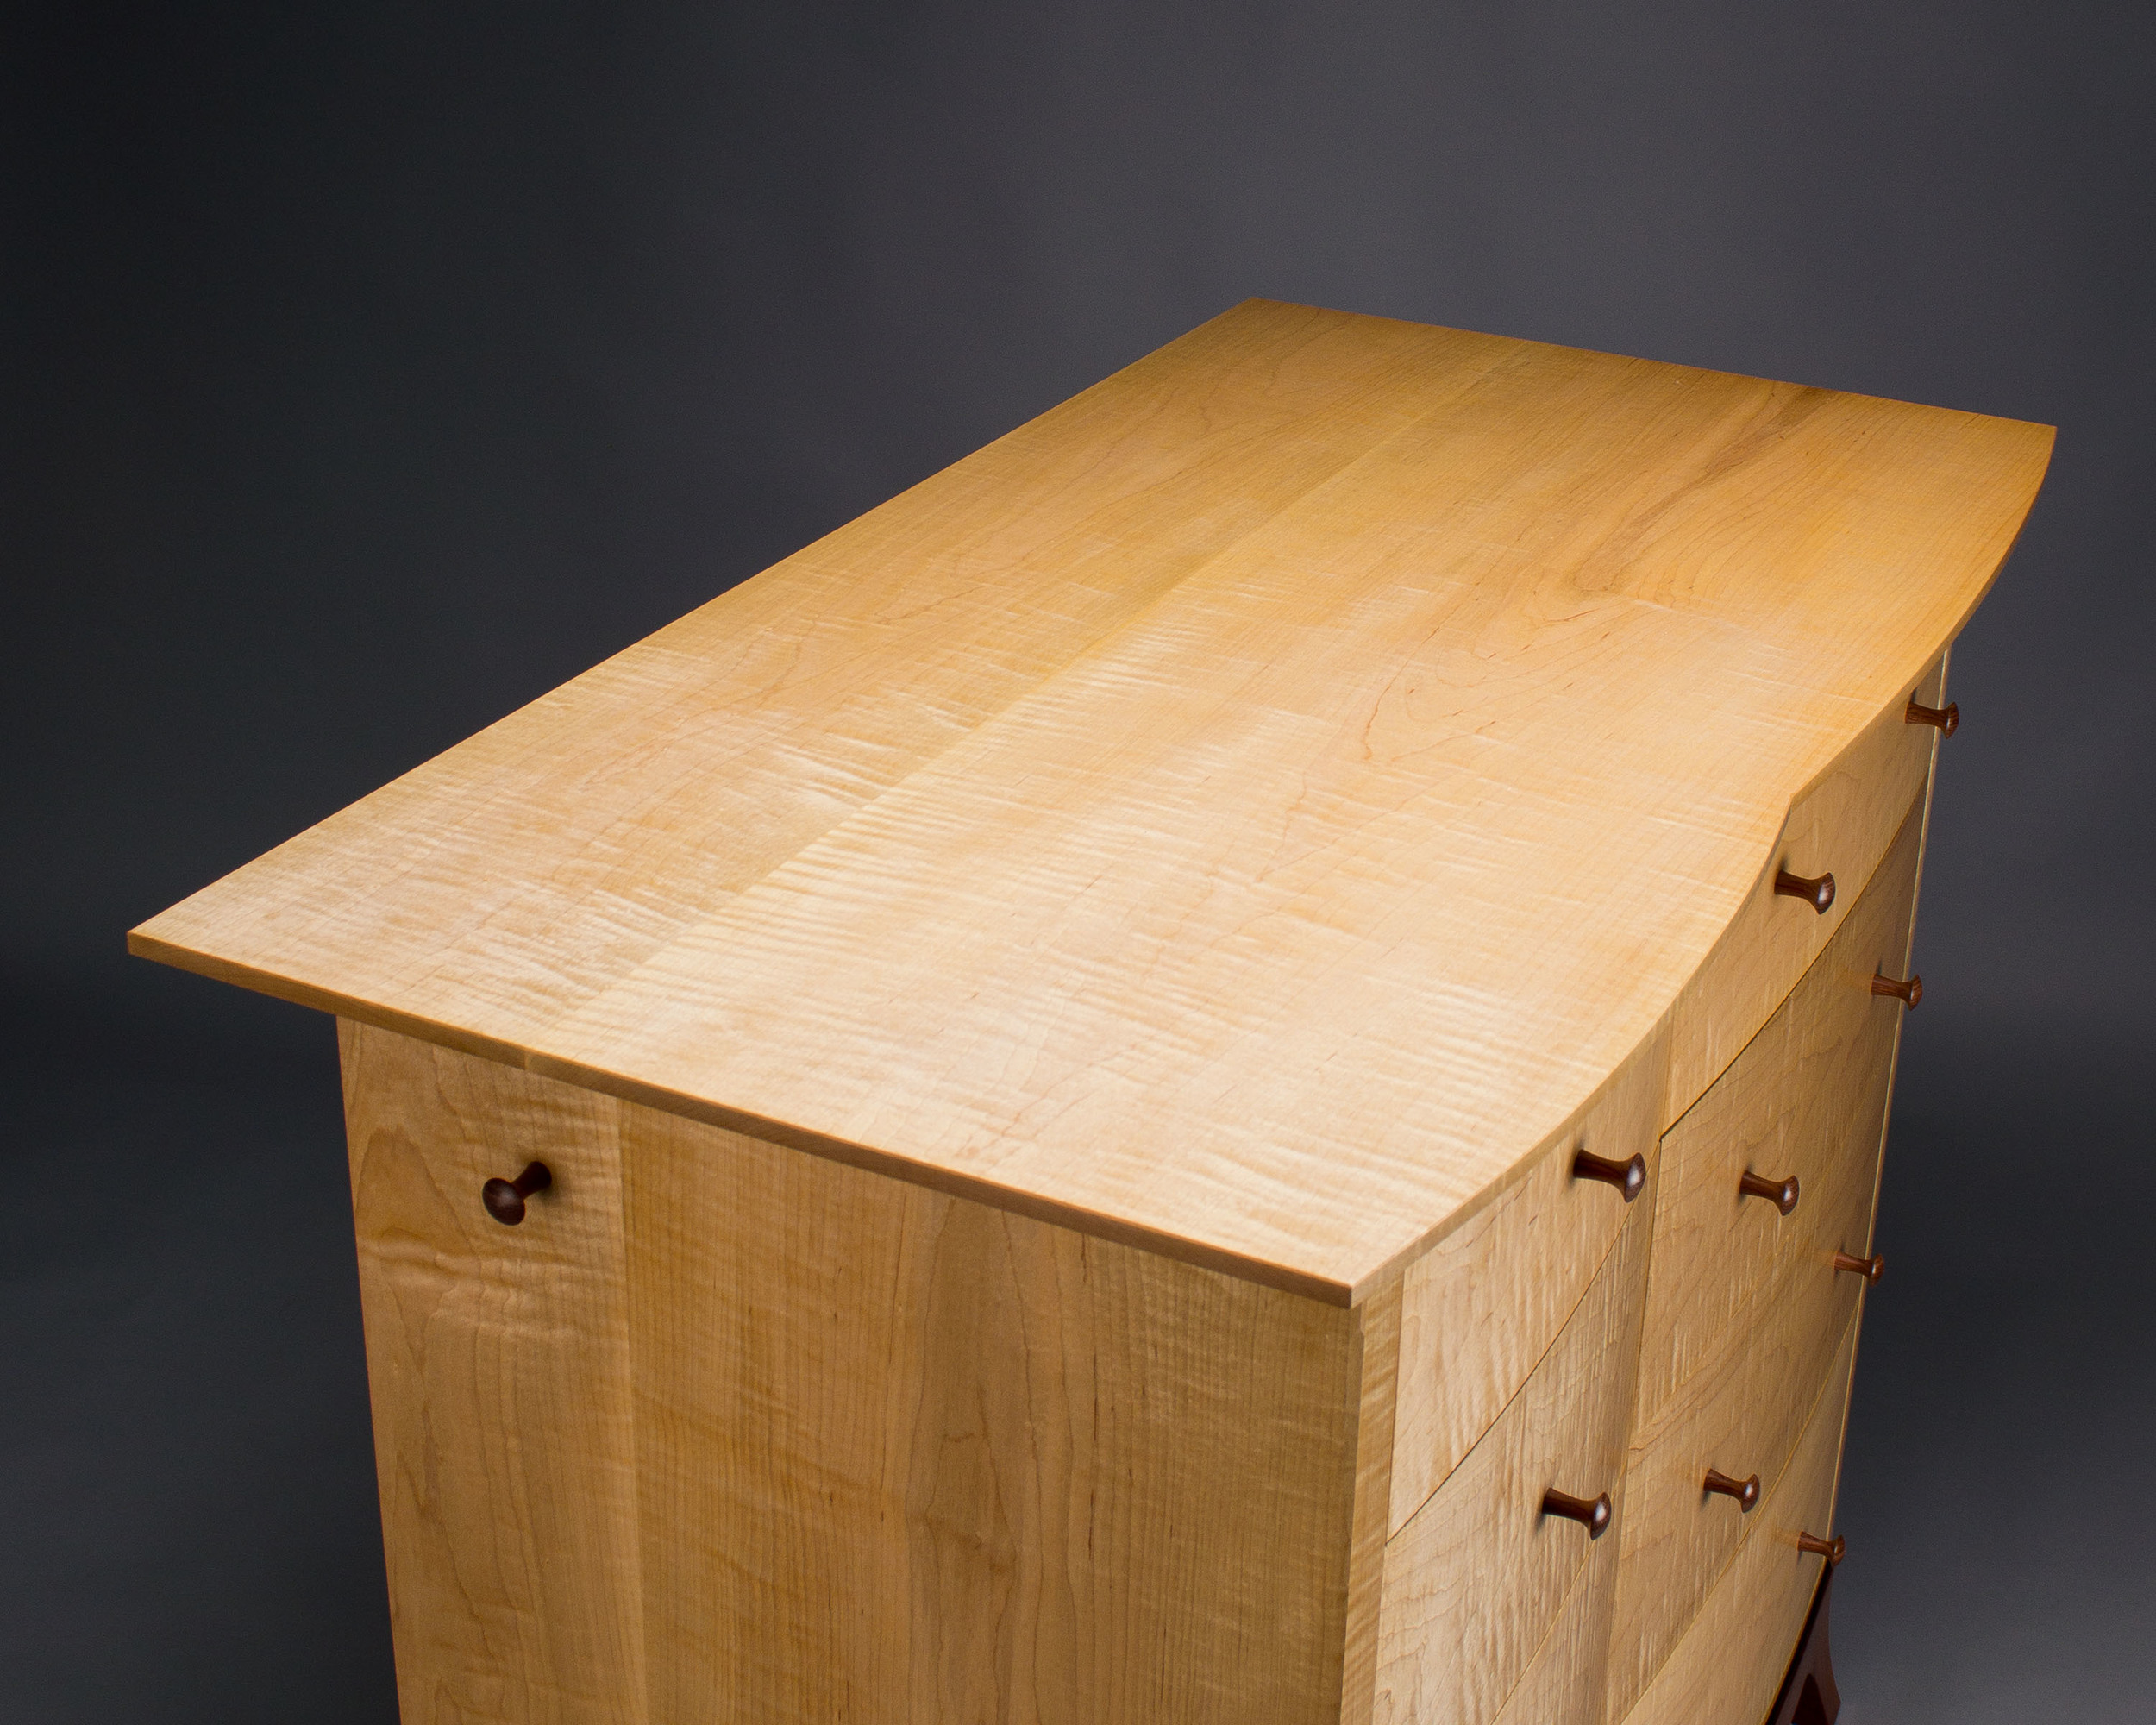  The top of the chest is curved to mirror the curves of the drawer fronts. 